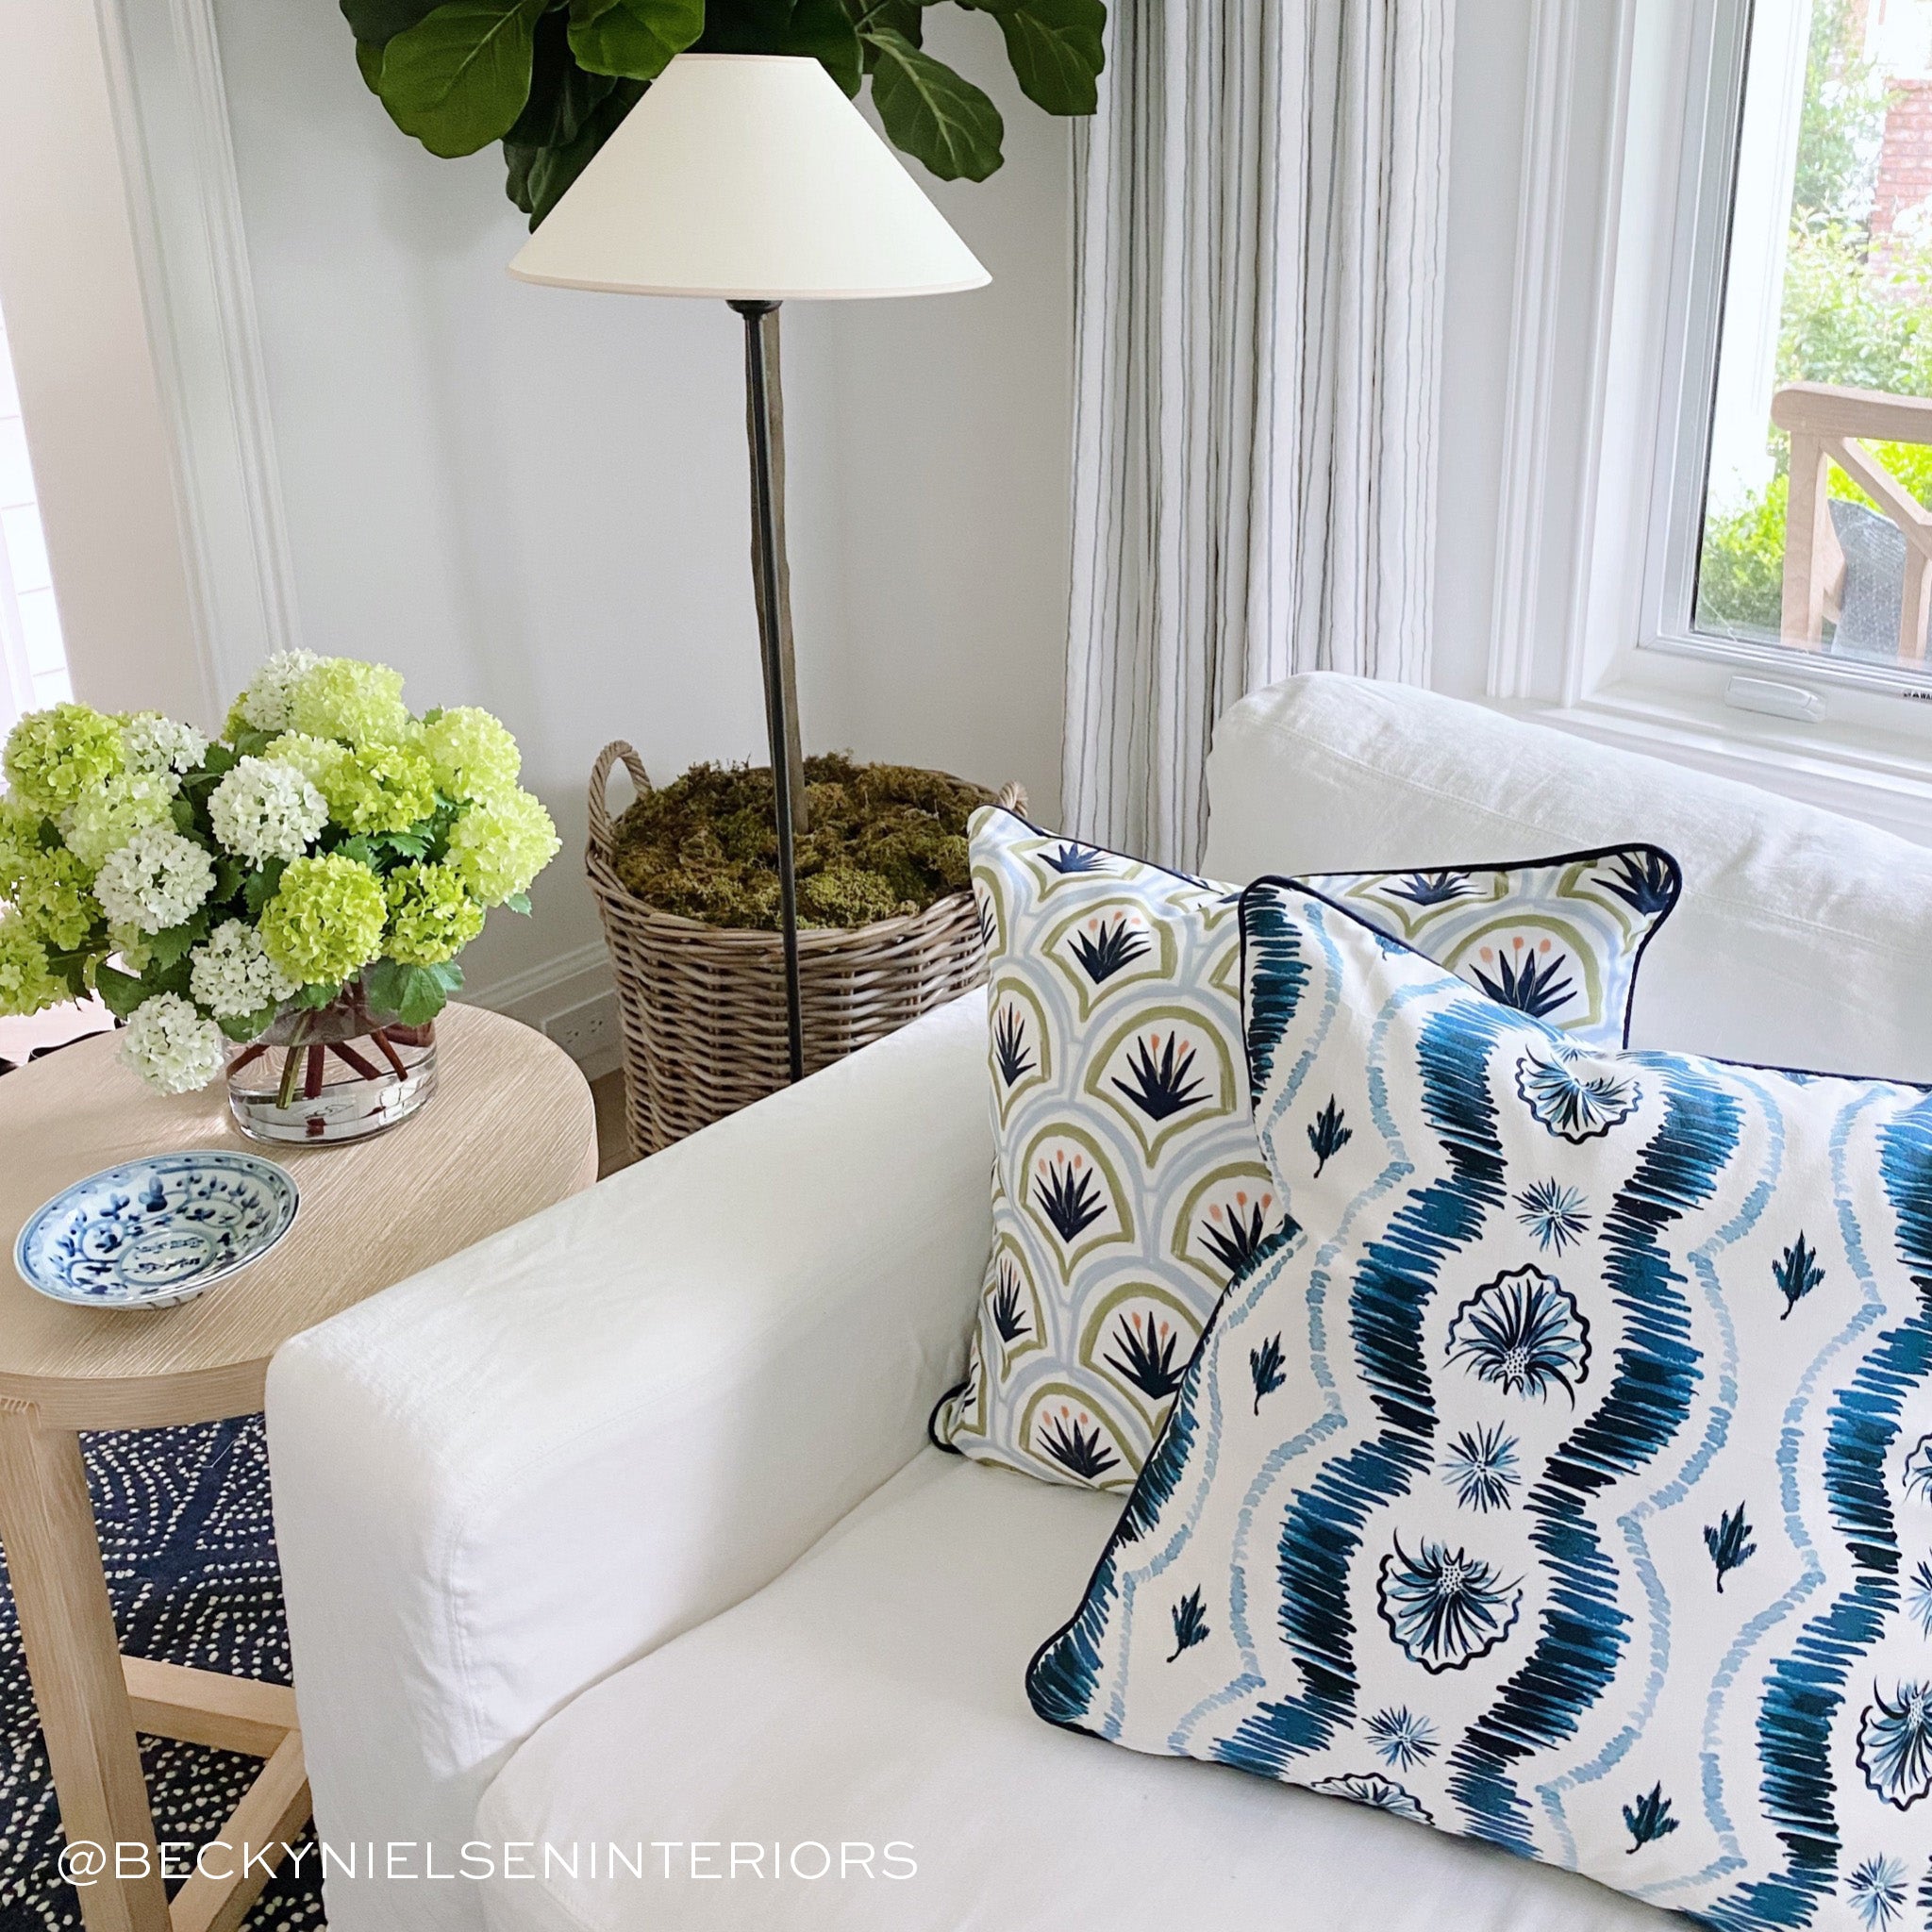 White couch close-up styled with an Art Deco Palm Pattern and a Blue Ikat Stripe Printed pillow next to small circular wooden table with green flowers in clear vase and plate on top. Photo taken by Becky Nielsen Interiors